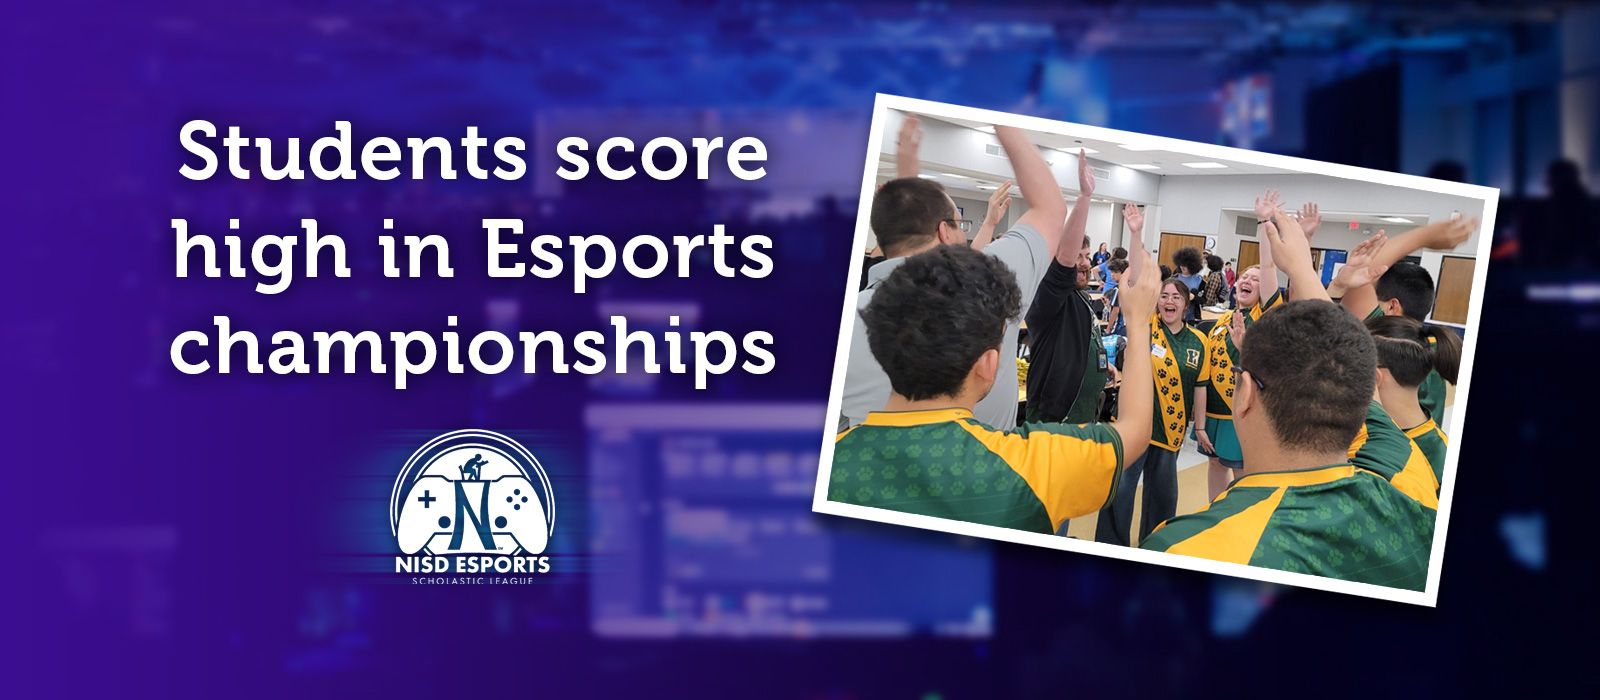 Students score high in Esports championships